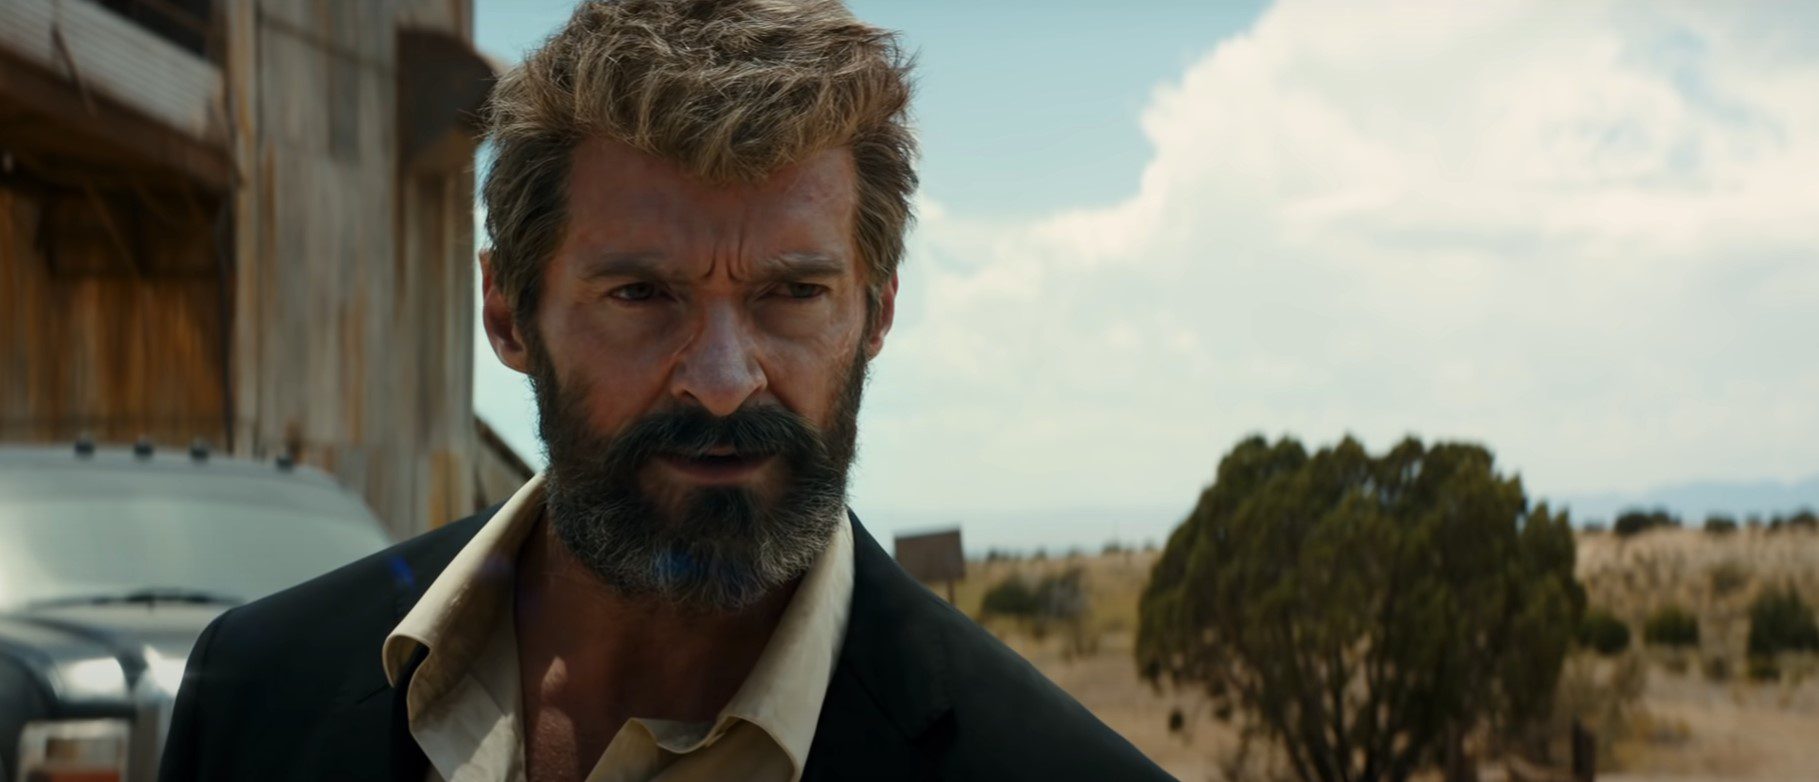 What Happened To THe Mutants In Logan?